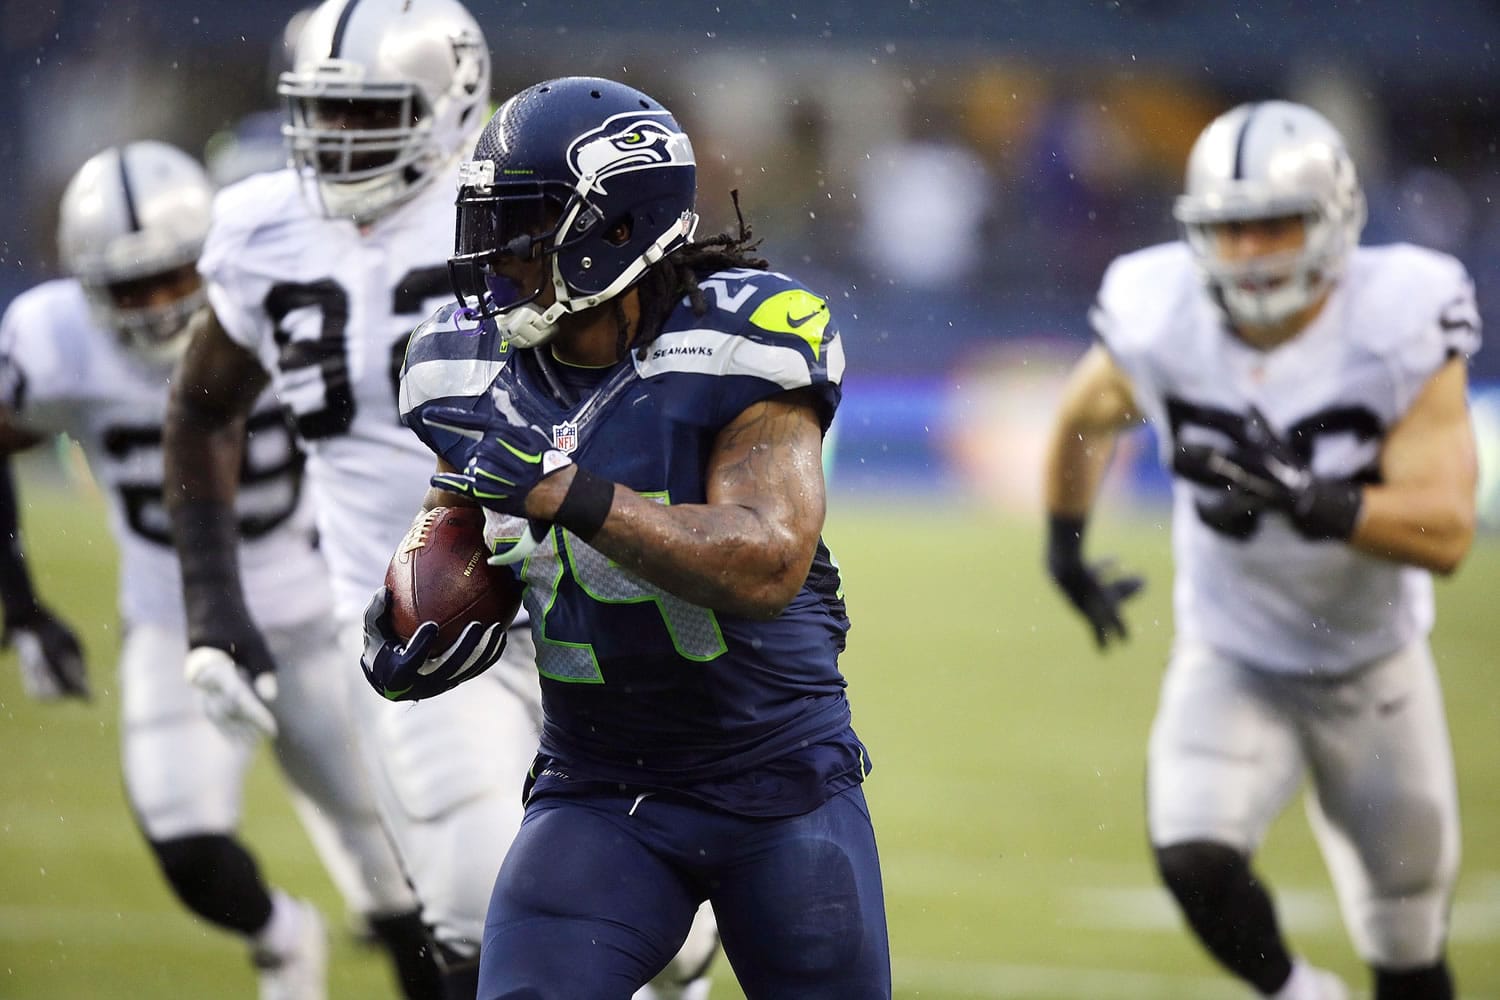 Seattle Seahawks running back Marshawn Lynch runs against the Oakland Raiders in the second half Sunday, Nov. 2, 2014, in Seattle. Lynch scored two touchdowns in the 30-24 win.